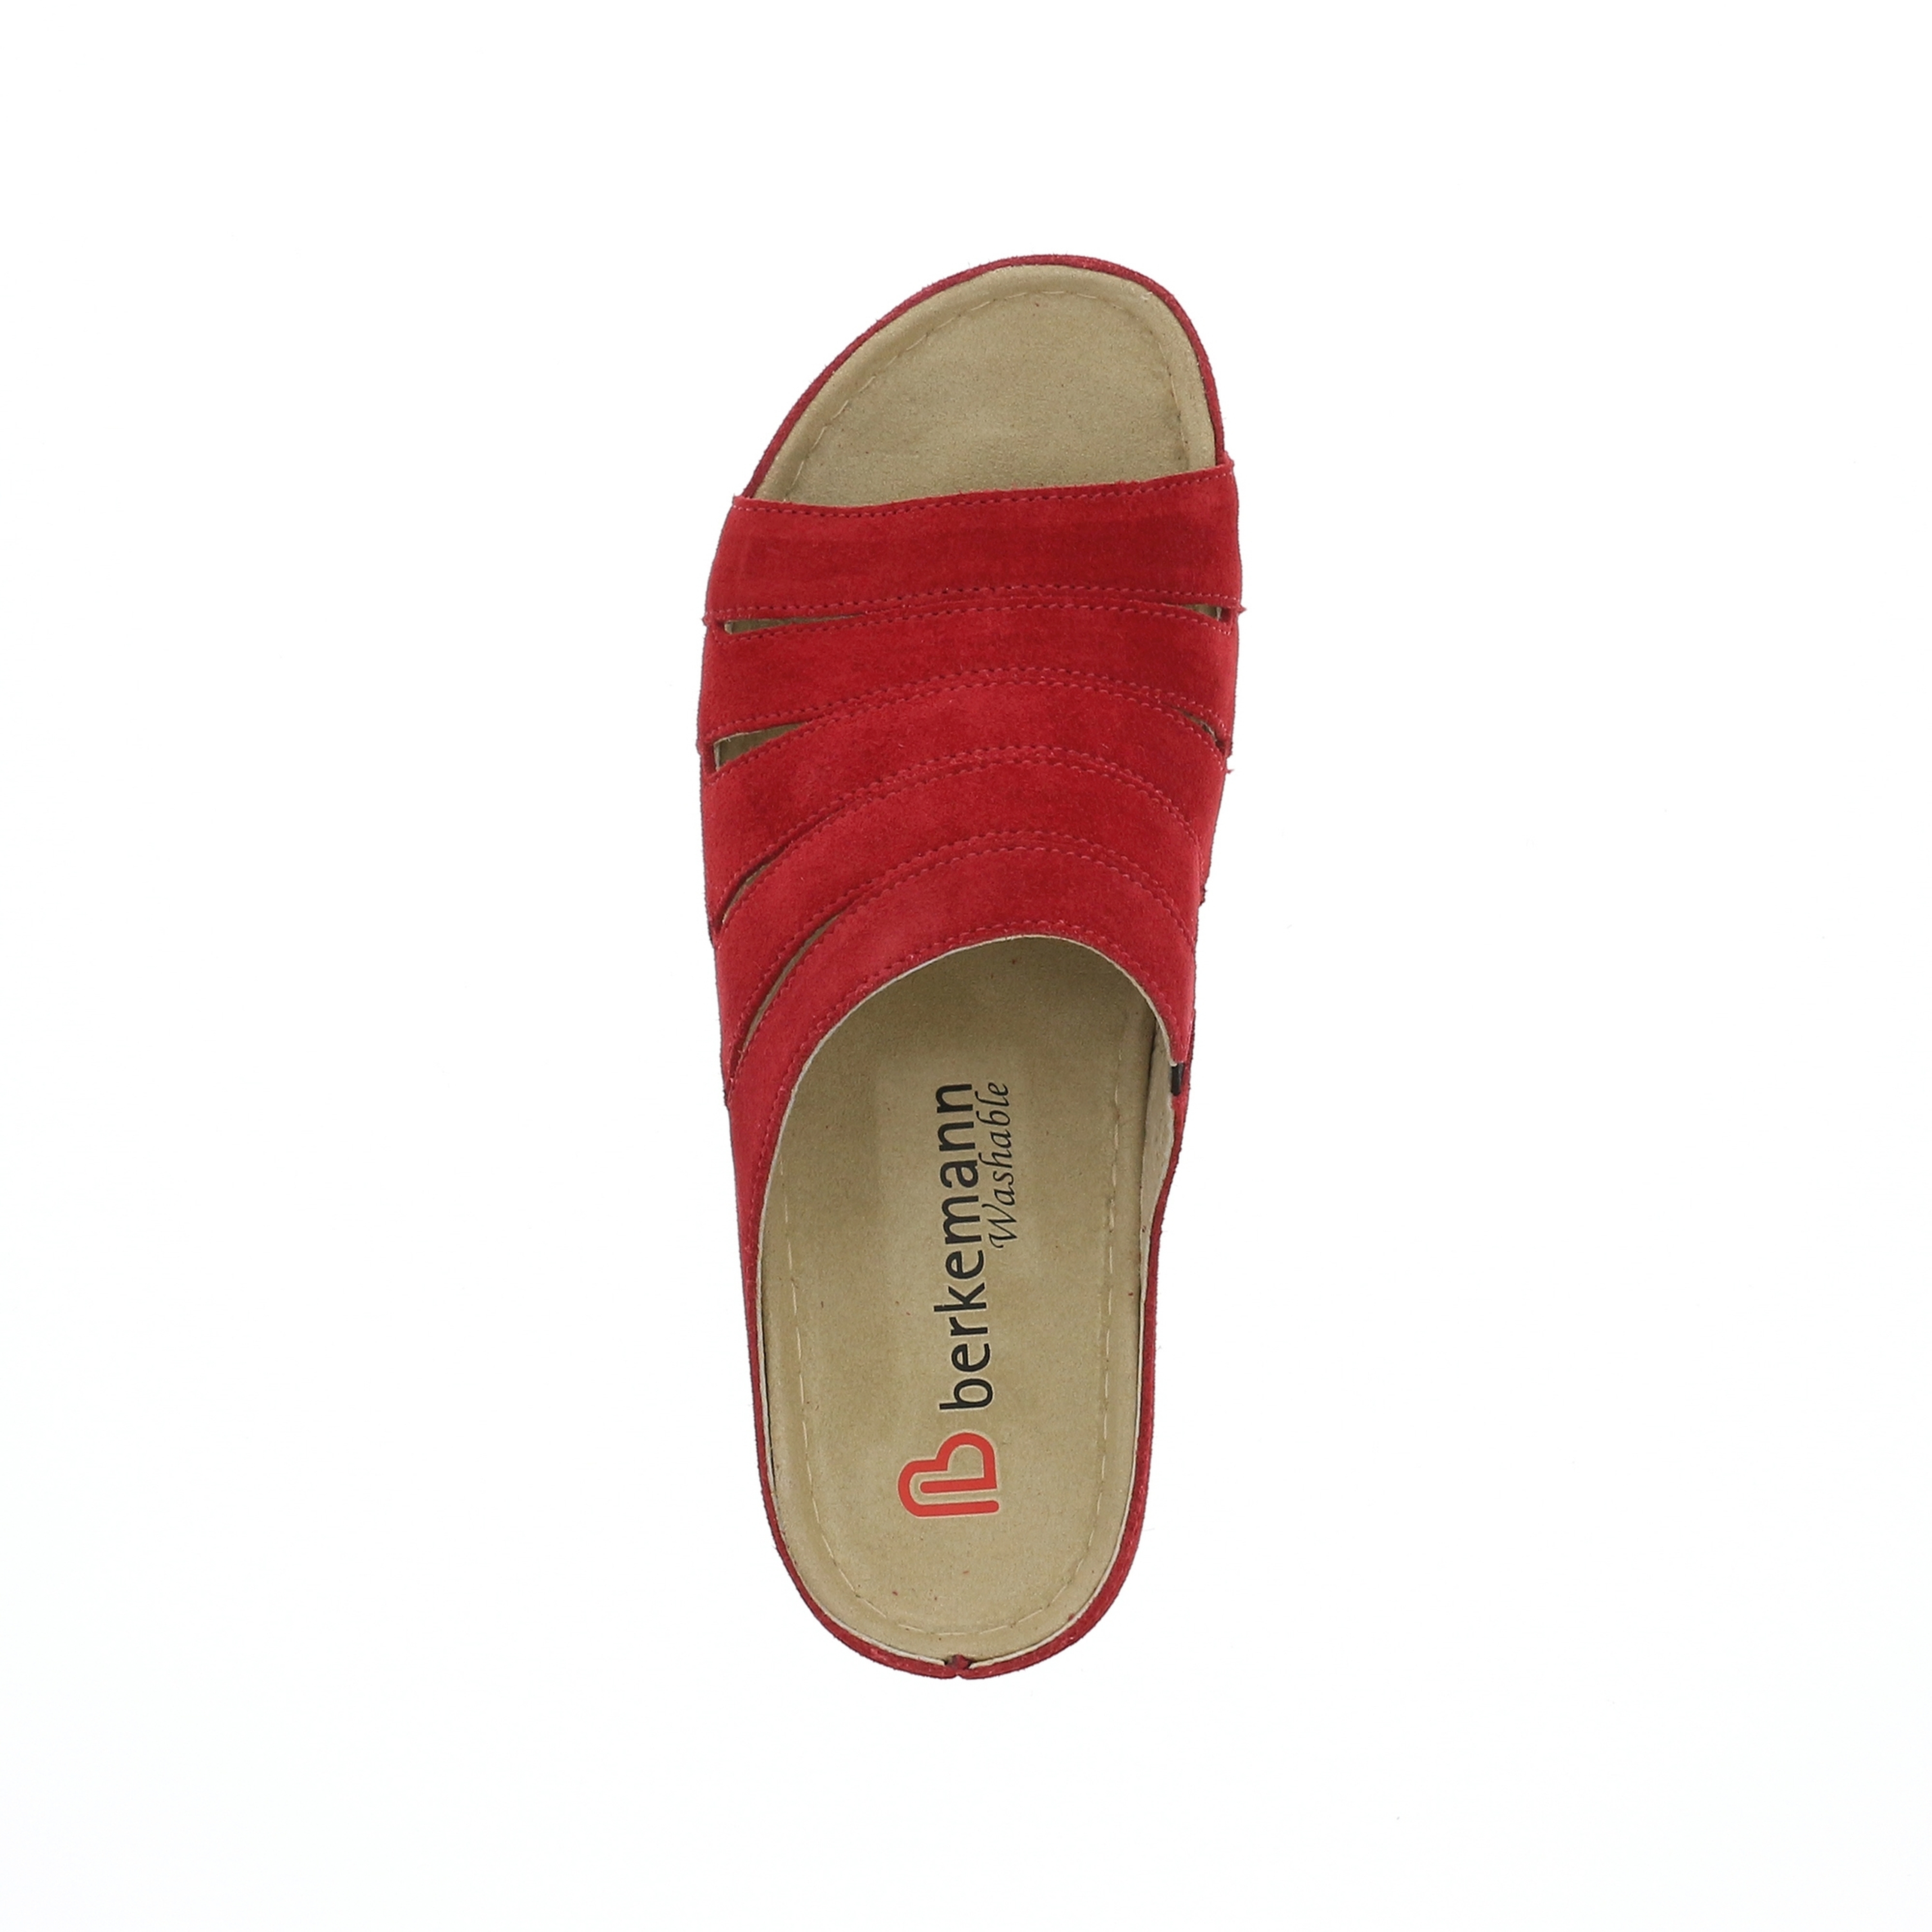 Bine Red suede leather